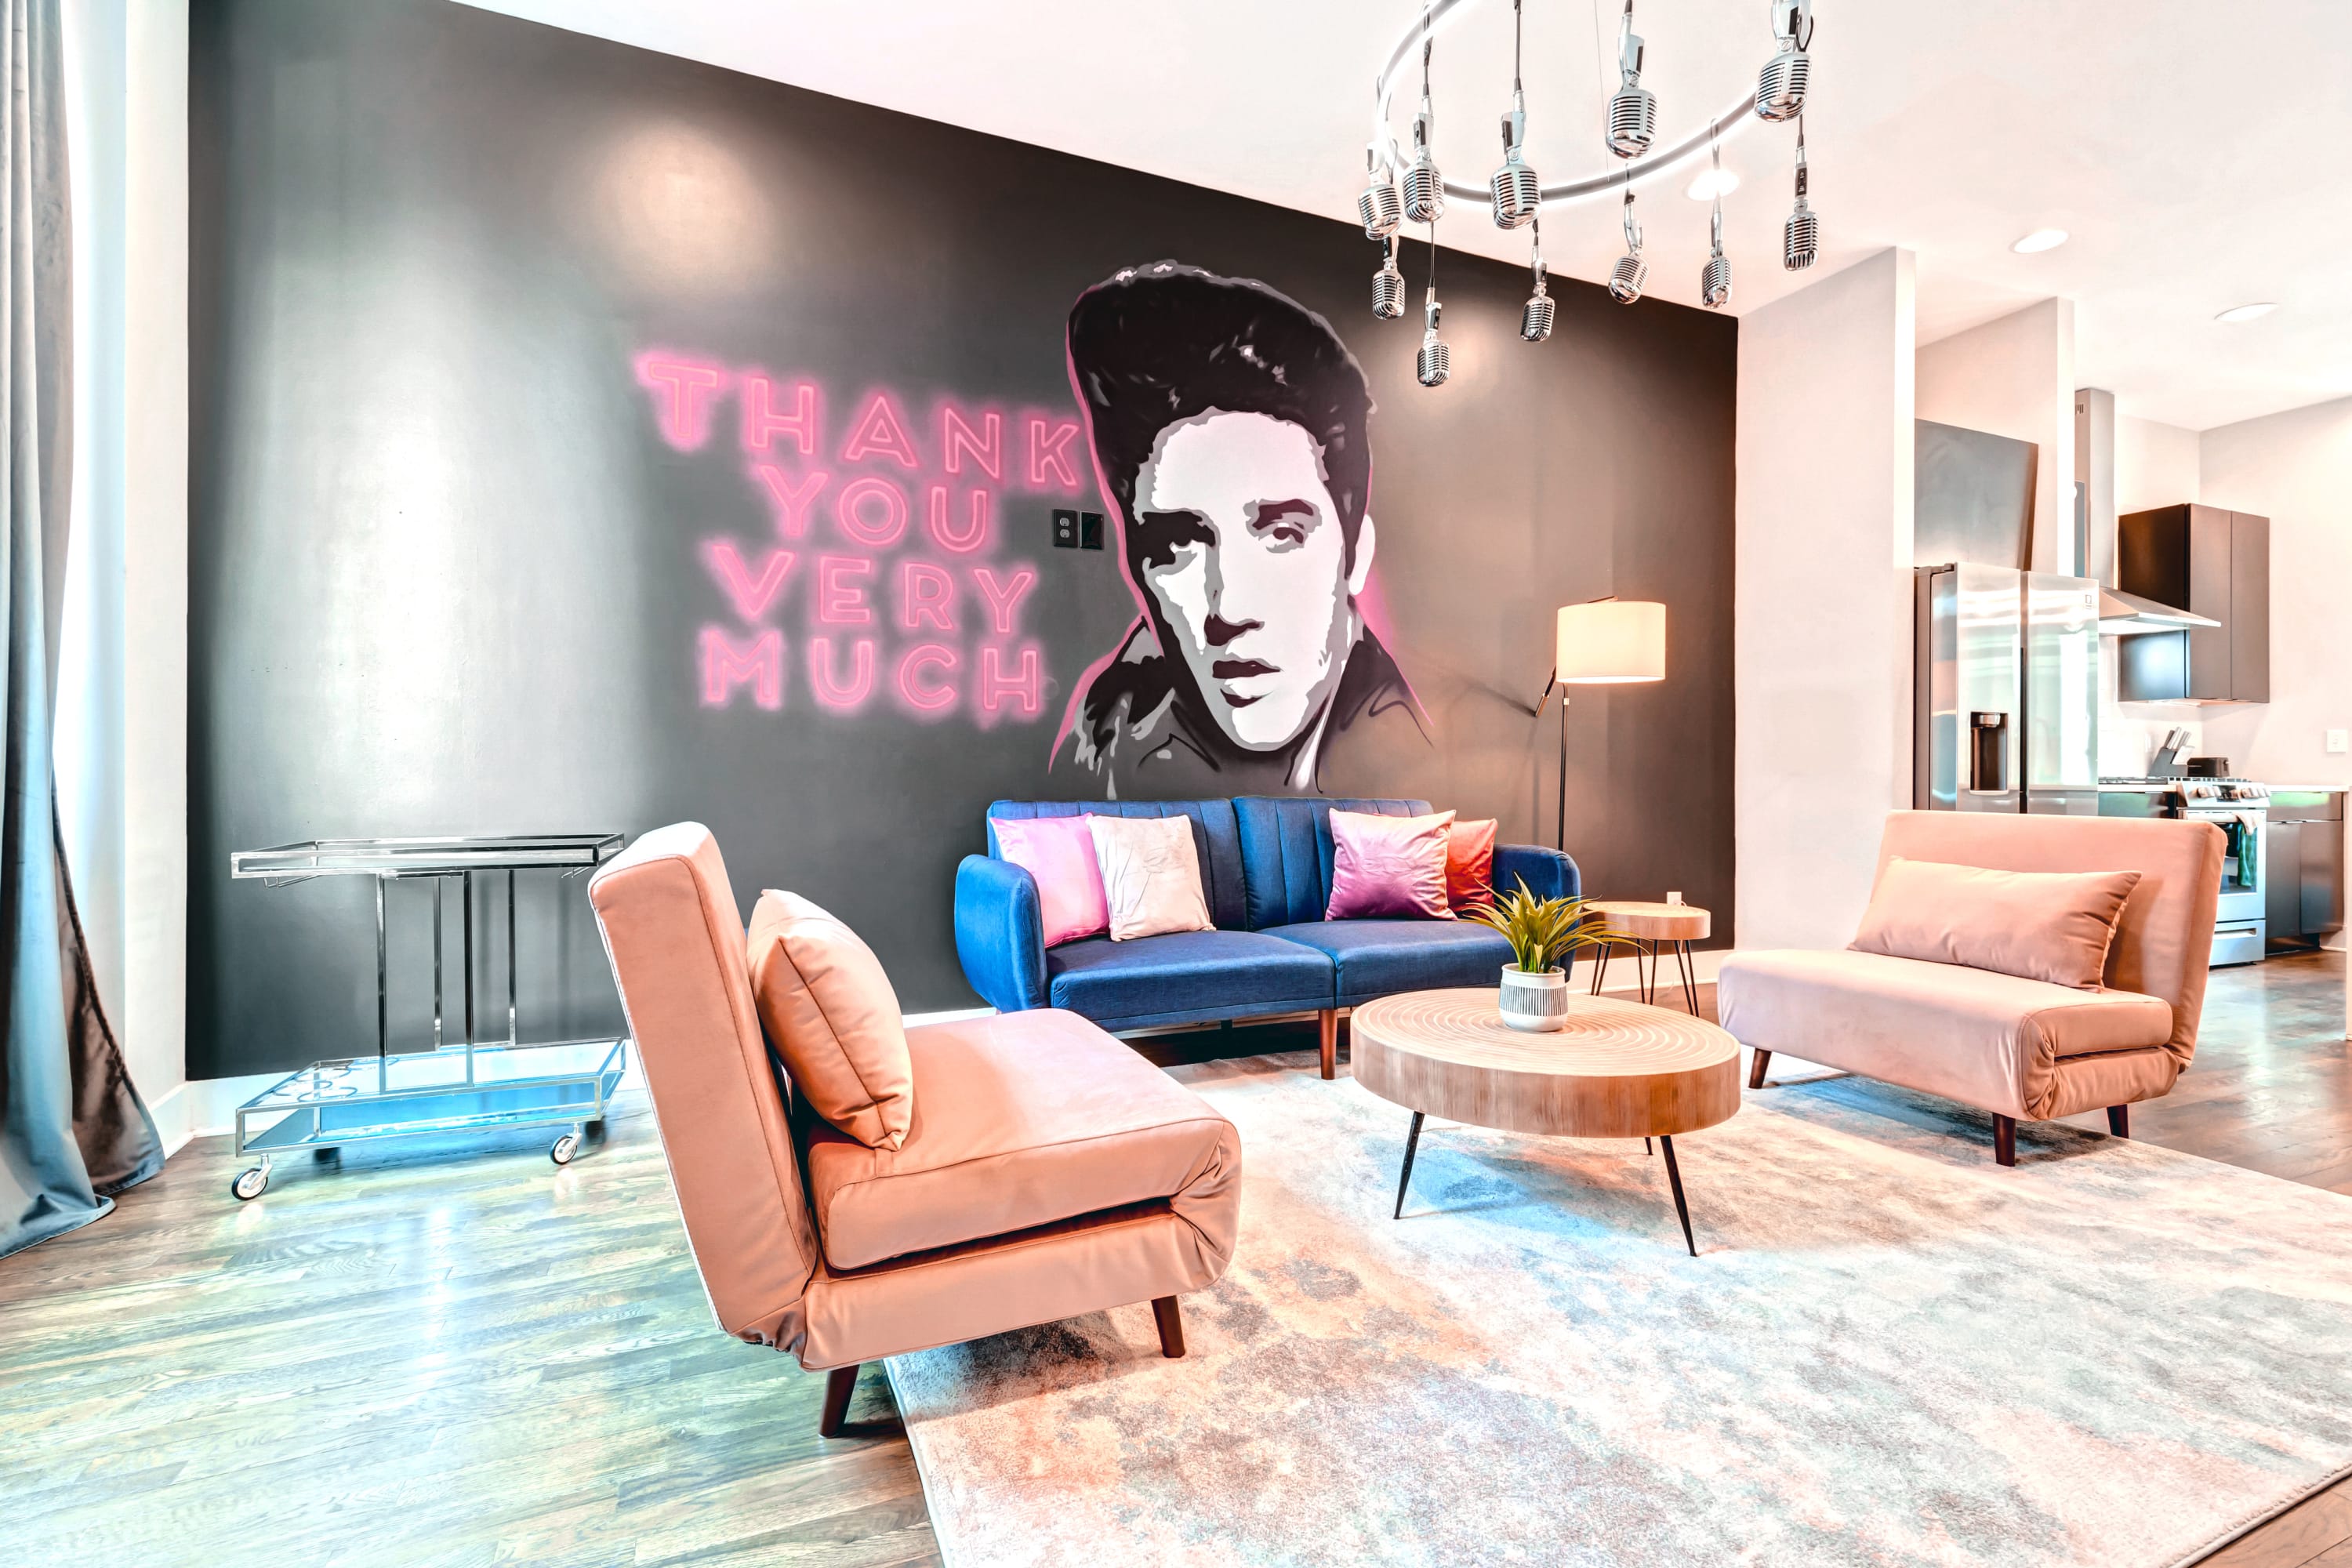 Gather your friends for a luxury getaway in this vibrant Nashville vacation rental, ideal for a Bachelorette bash or any group vacation. Lounge on the chic peach sofas under the gaze of the iconic Elvis mural. With its bright colors and pop culture flair, this space is ready to amp up your Music City experience. 

Book your stay with Misfit Homes now and dive into your Nashville adventure!